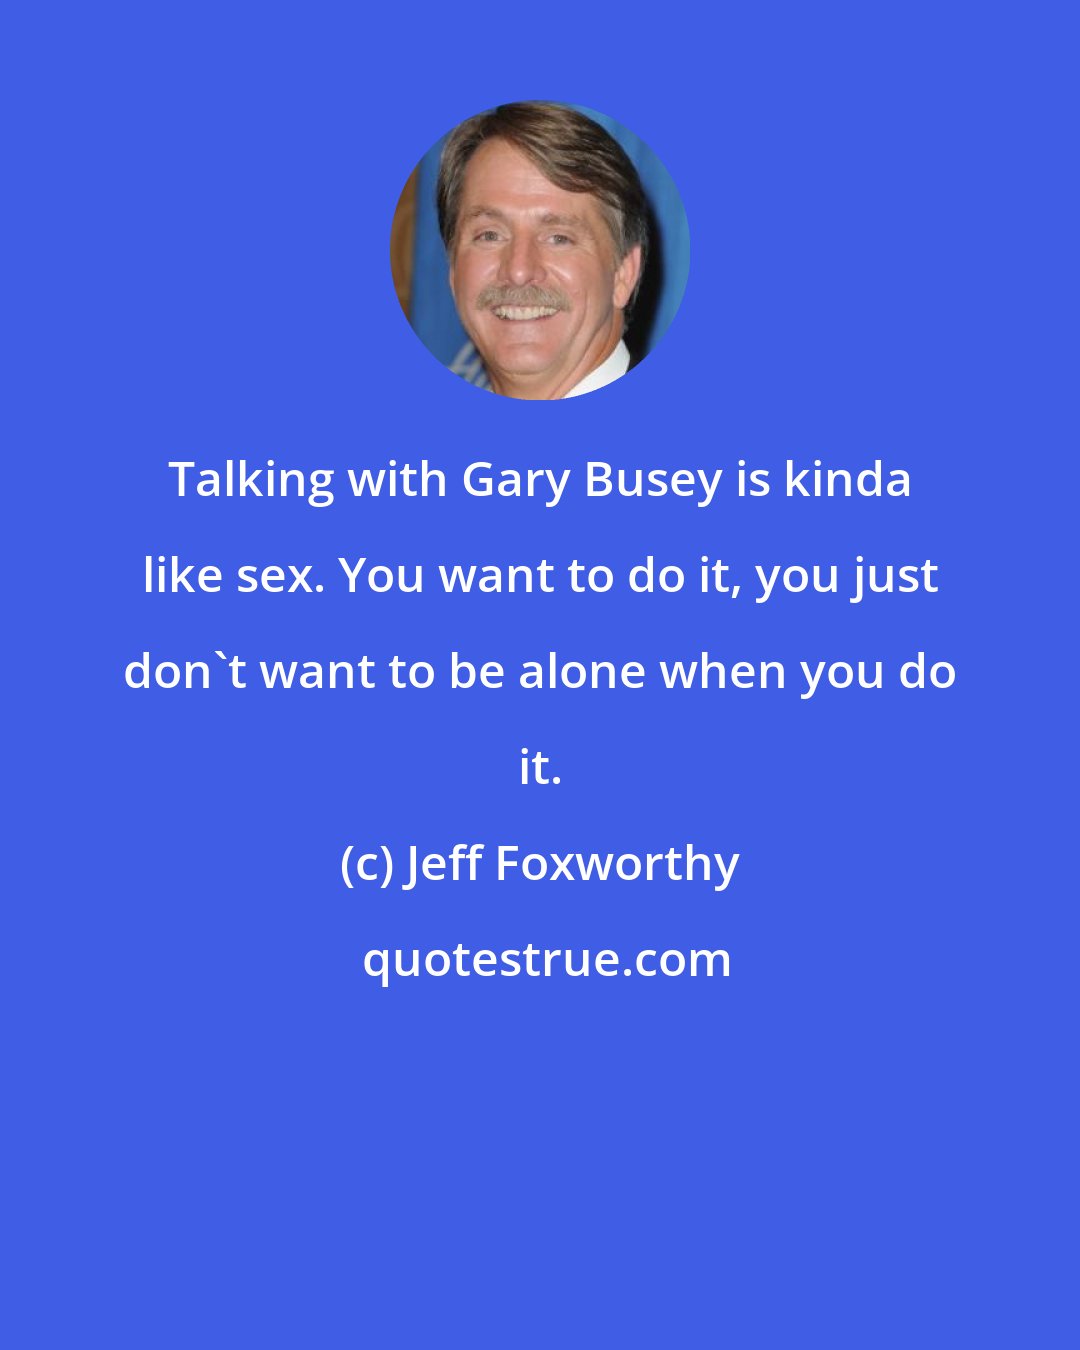 Jeff Foxworthy: Talking with Gary Busey is kinda like sex. You want to do it, you just don't want to be alone when you do it.